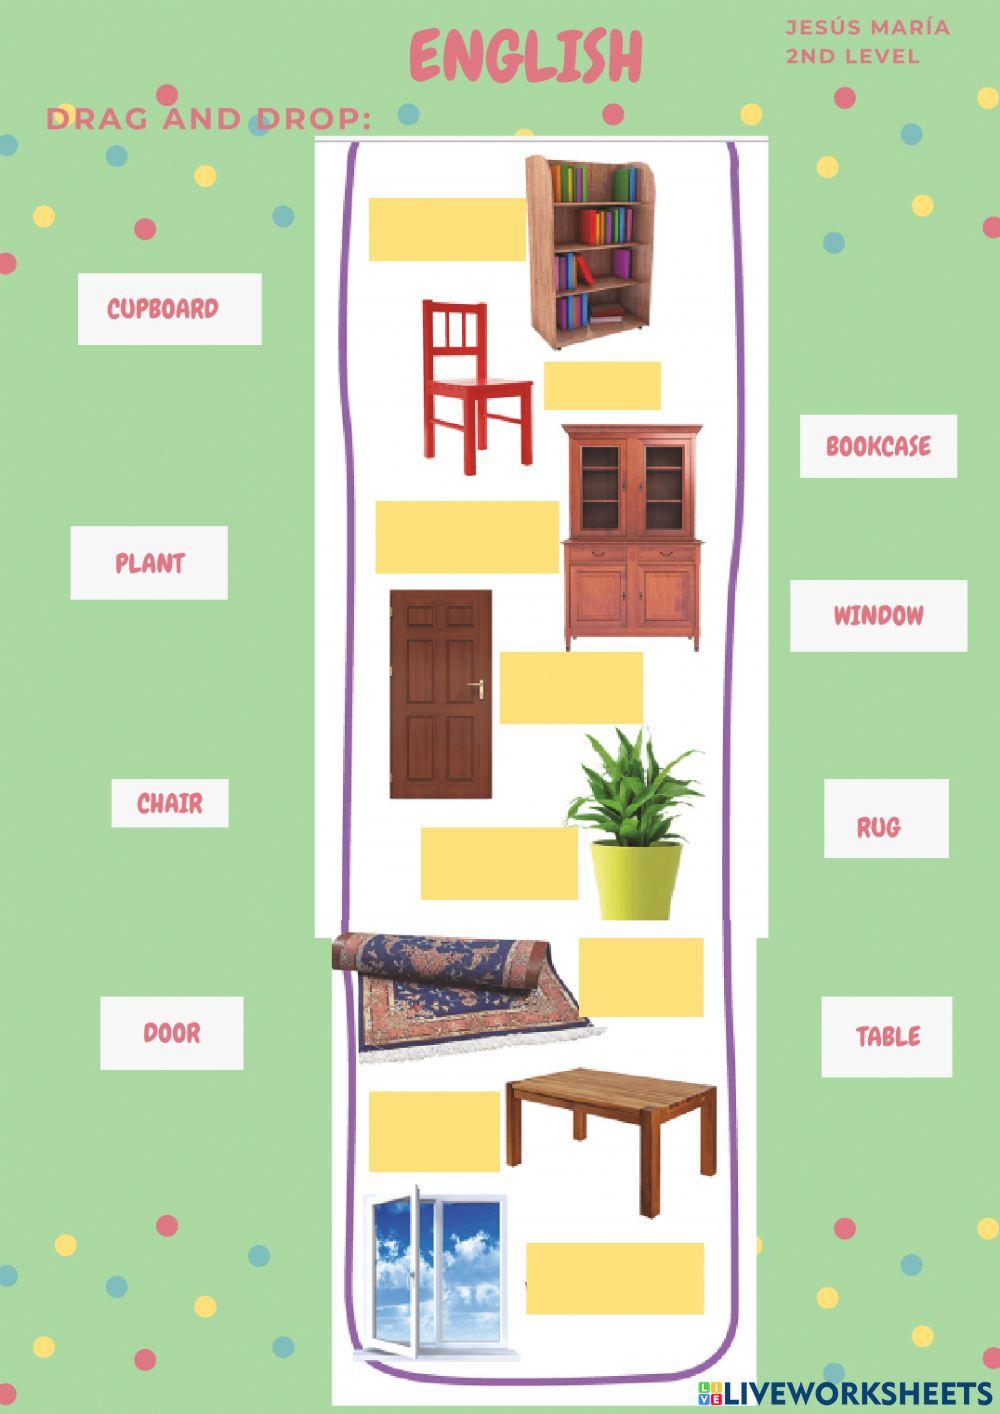 Our house-Prepositions